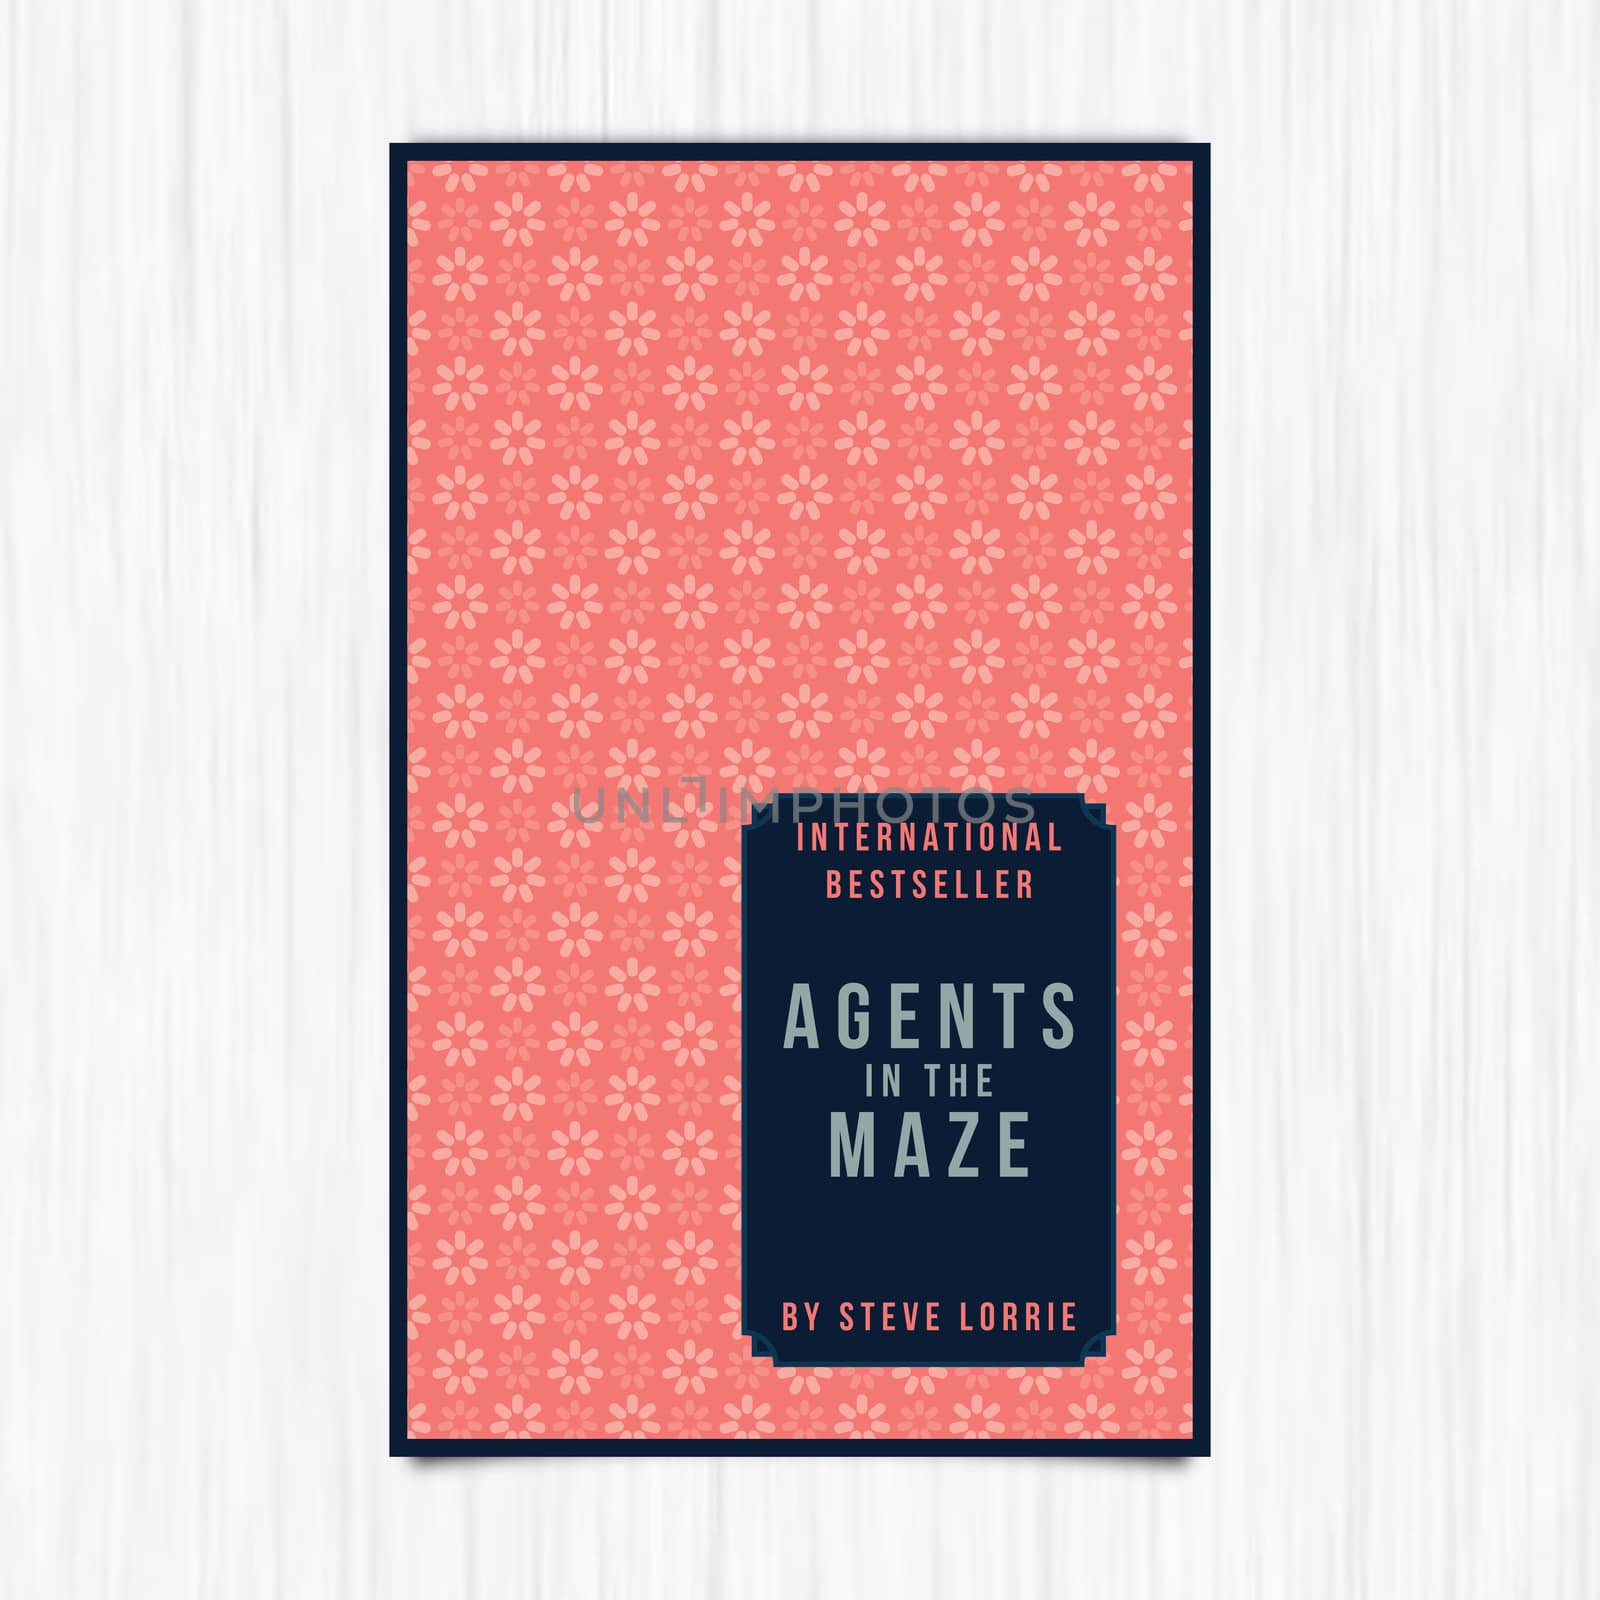 Vector of novel cover with agents in the maze text against white background